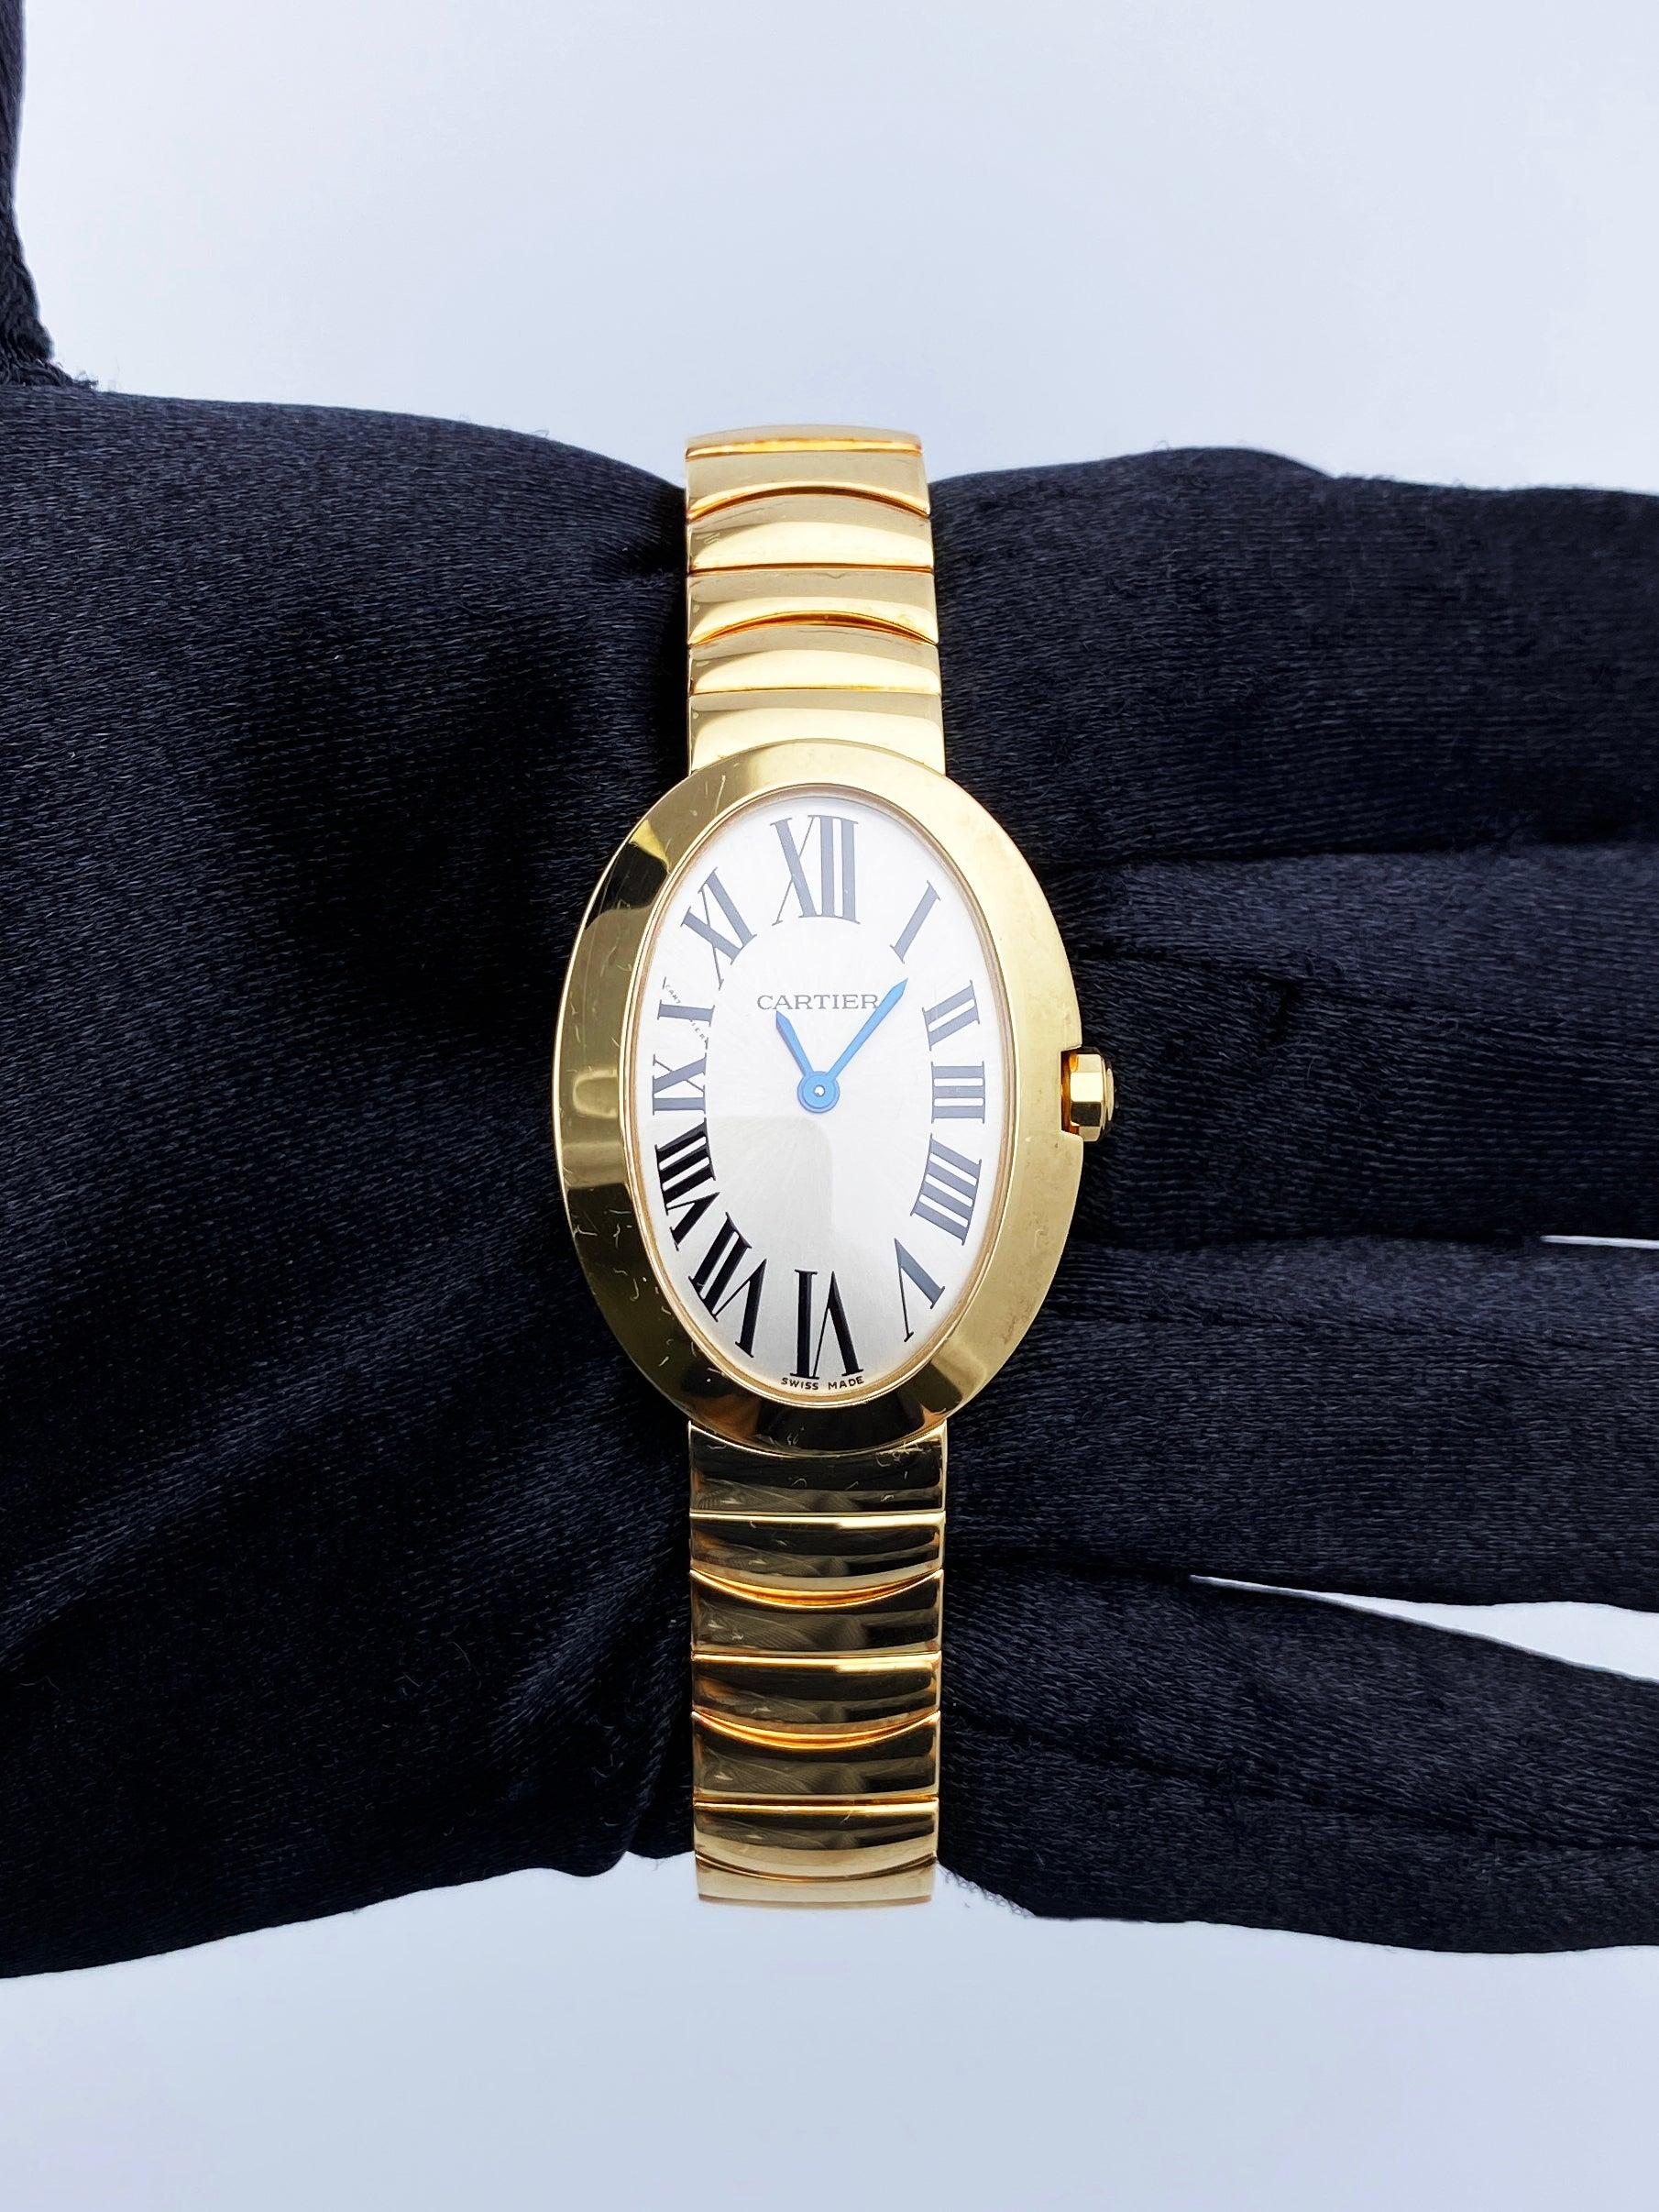 Cartier Baignoire 3208 Ladies Watch. 24.5mm 18K yellow gold case with 18K yellow gold bezel. Silver dial with blue hands and black Roman numeral hour markers. 18K yellow gold bracelet with hidden butterfly clasp. Will fit up to 6-inch wrist.